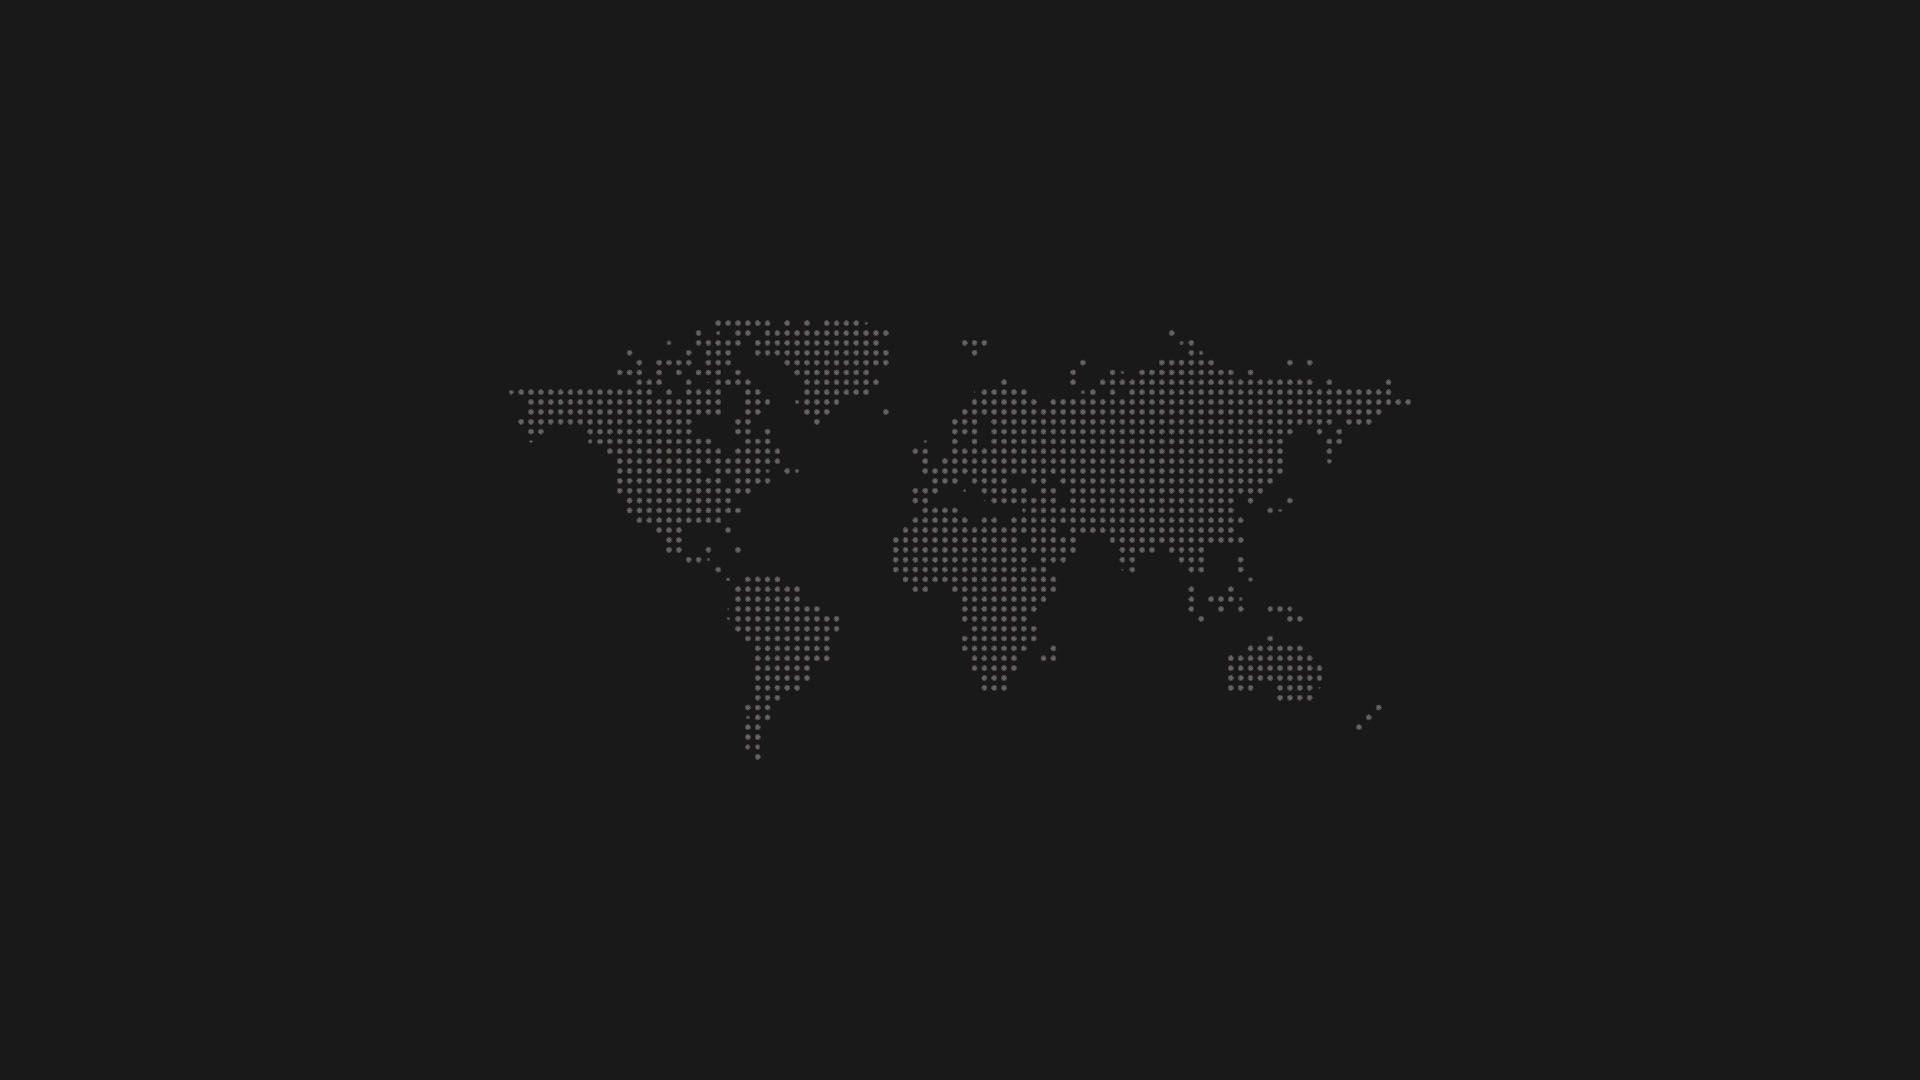 Best & Inspirational High Quality World Map Background